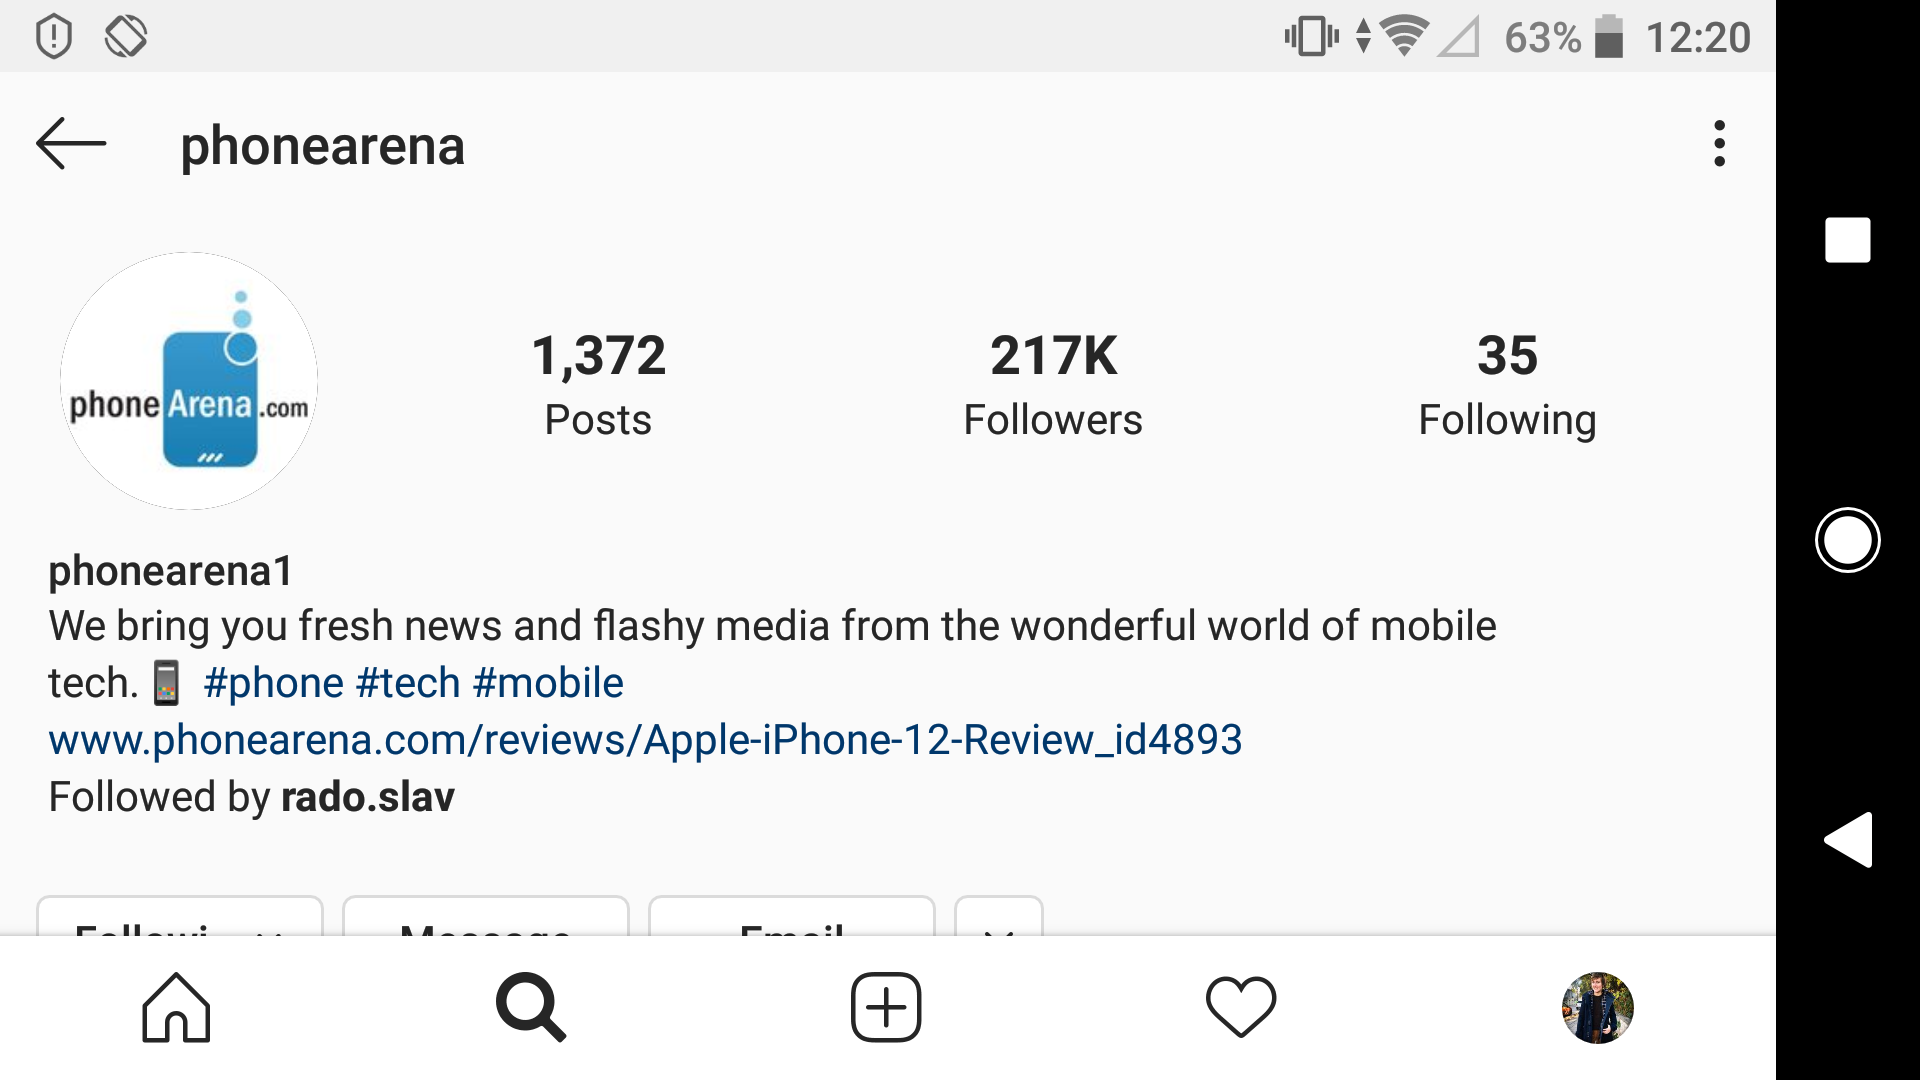 Instagram is now open in landscape mode - How to force landscape or portrait mode in apps like Instagram and others (Android)